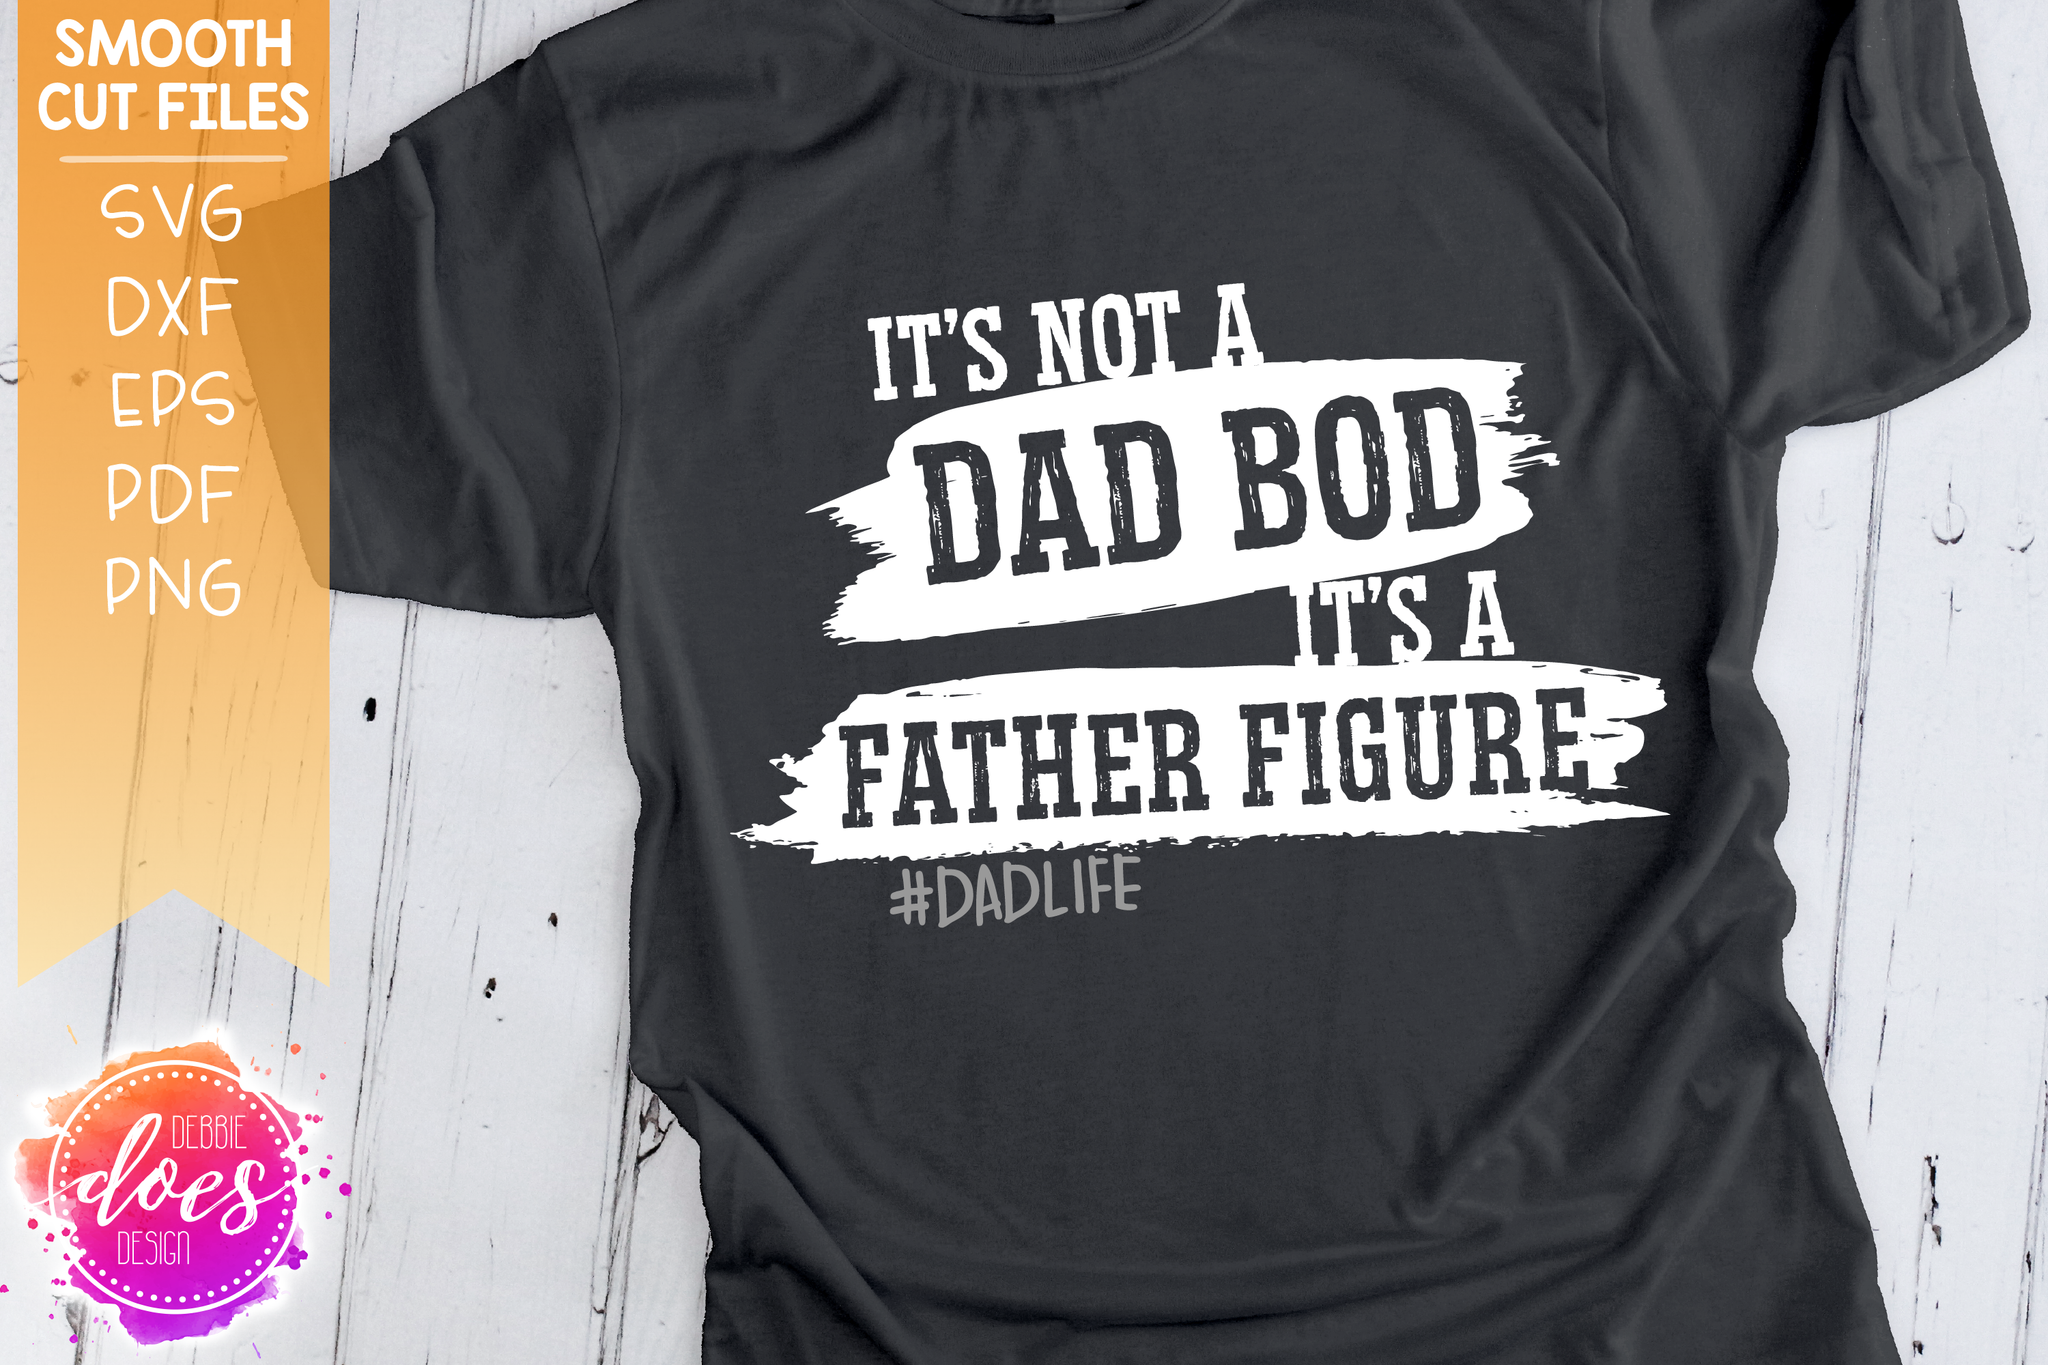 Download It's Not a Dad Bod It's a Father Figure - SVG File ...